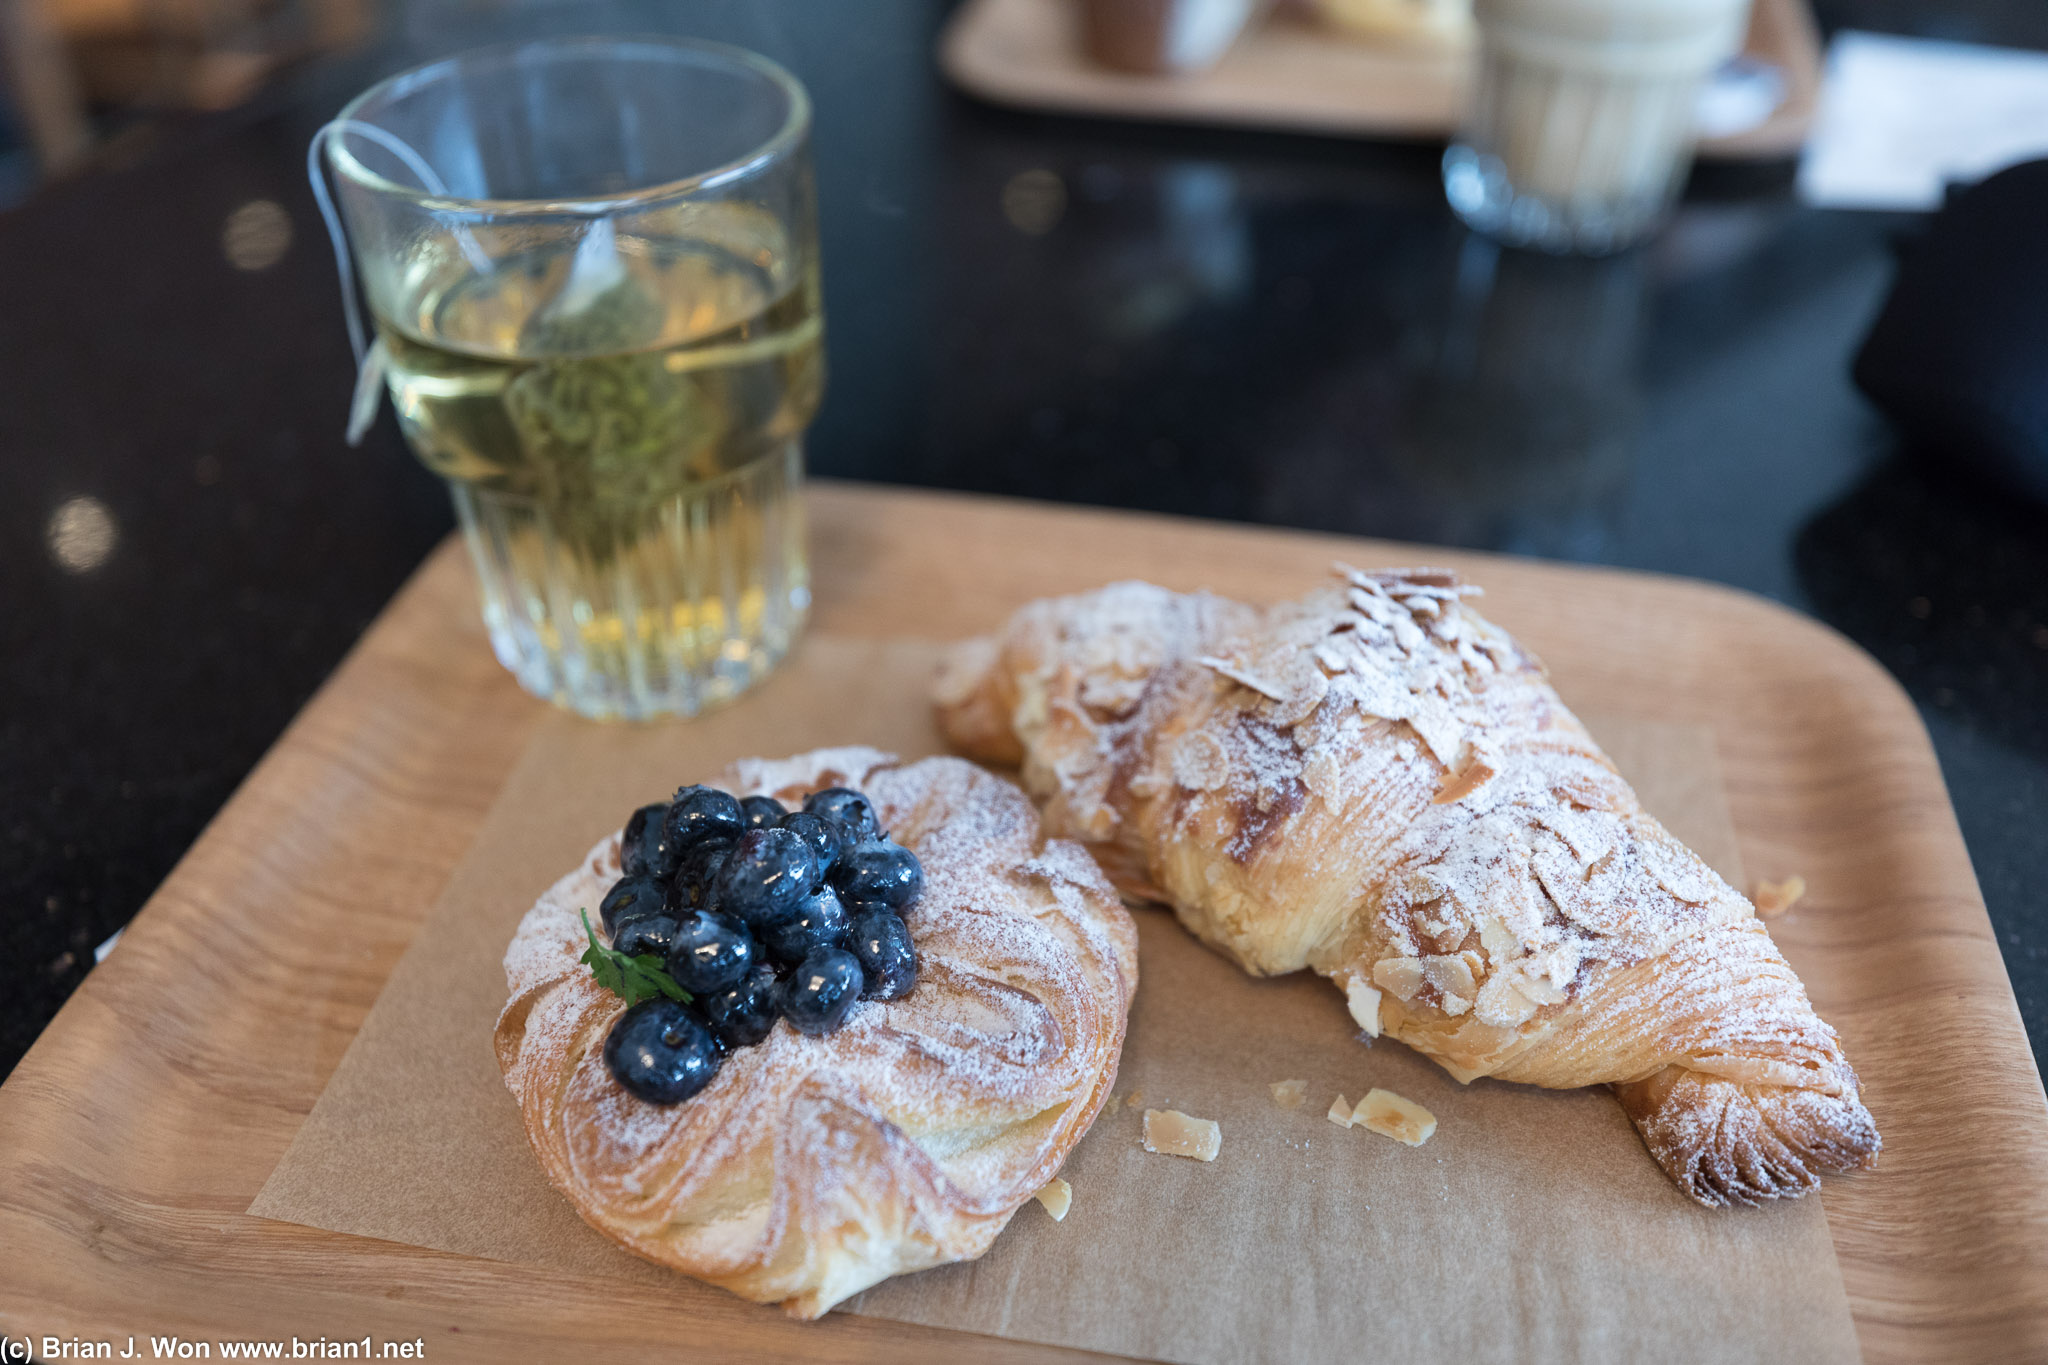 Almond croissant and blueberry pastry.